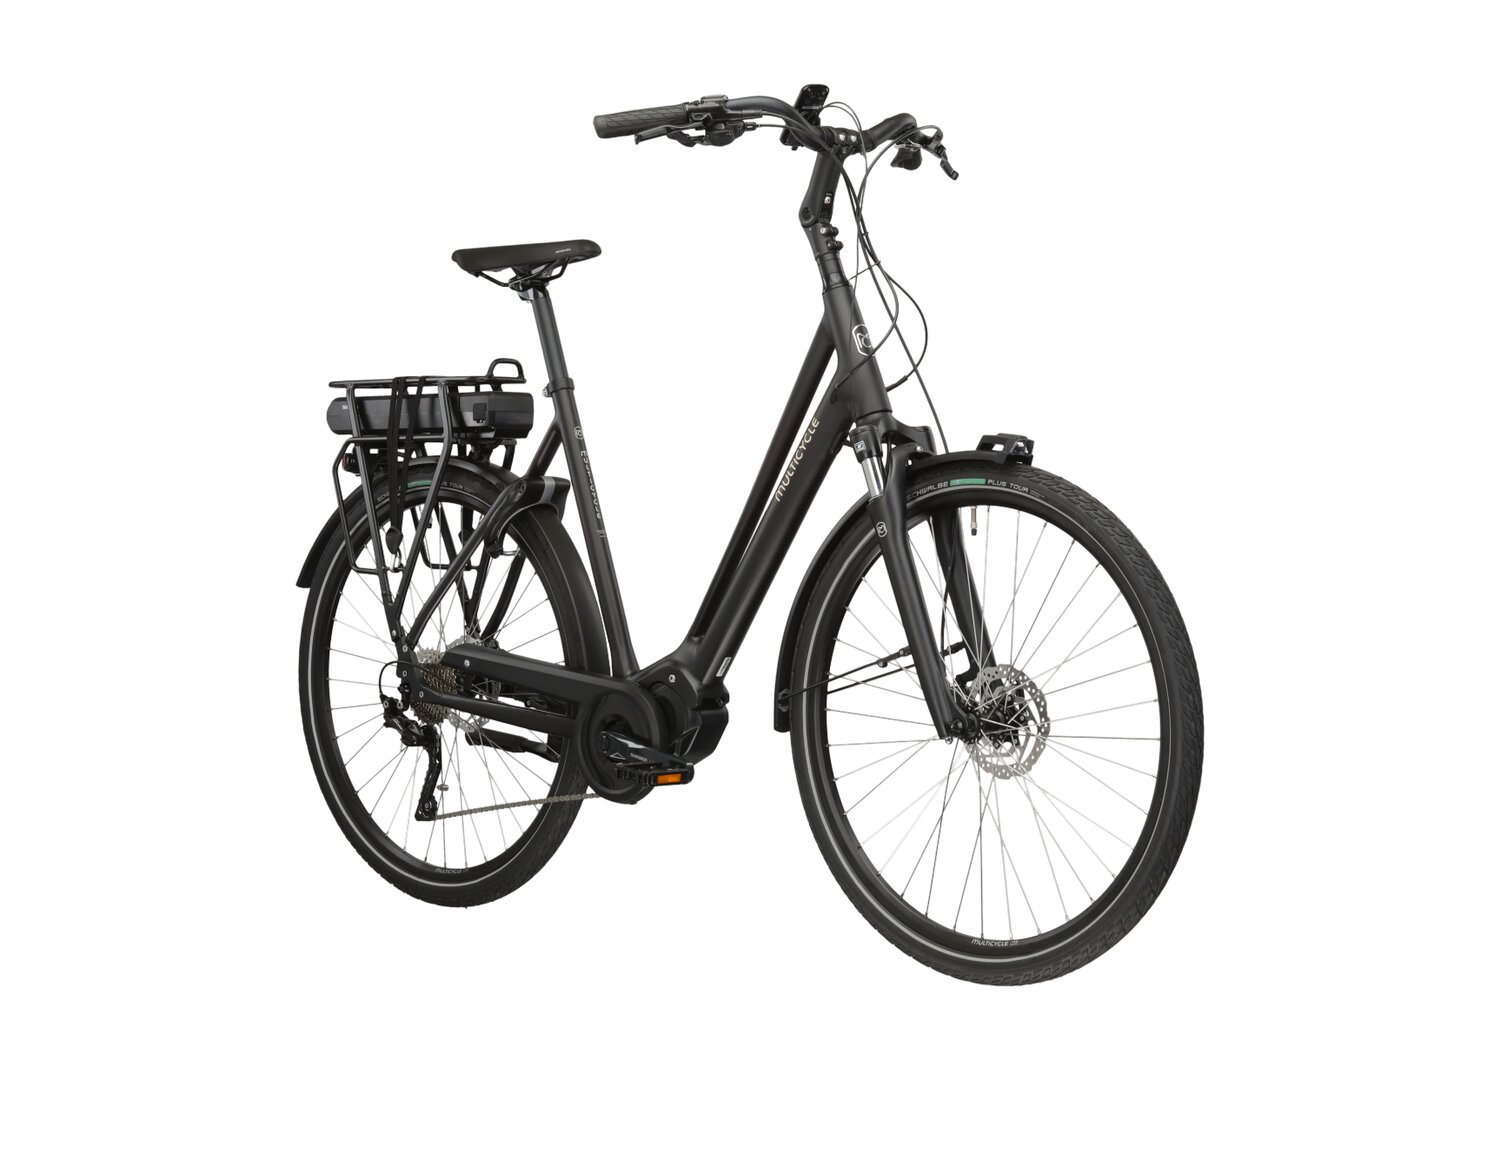 Solo EMS Multicycle 500 Wh UNI